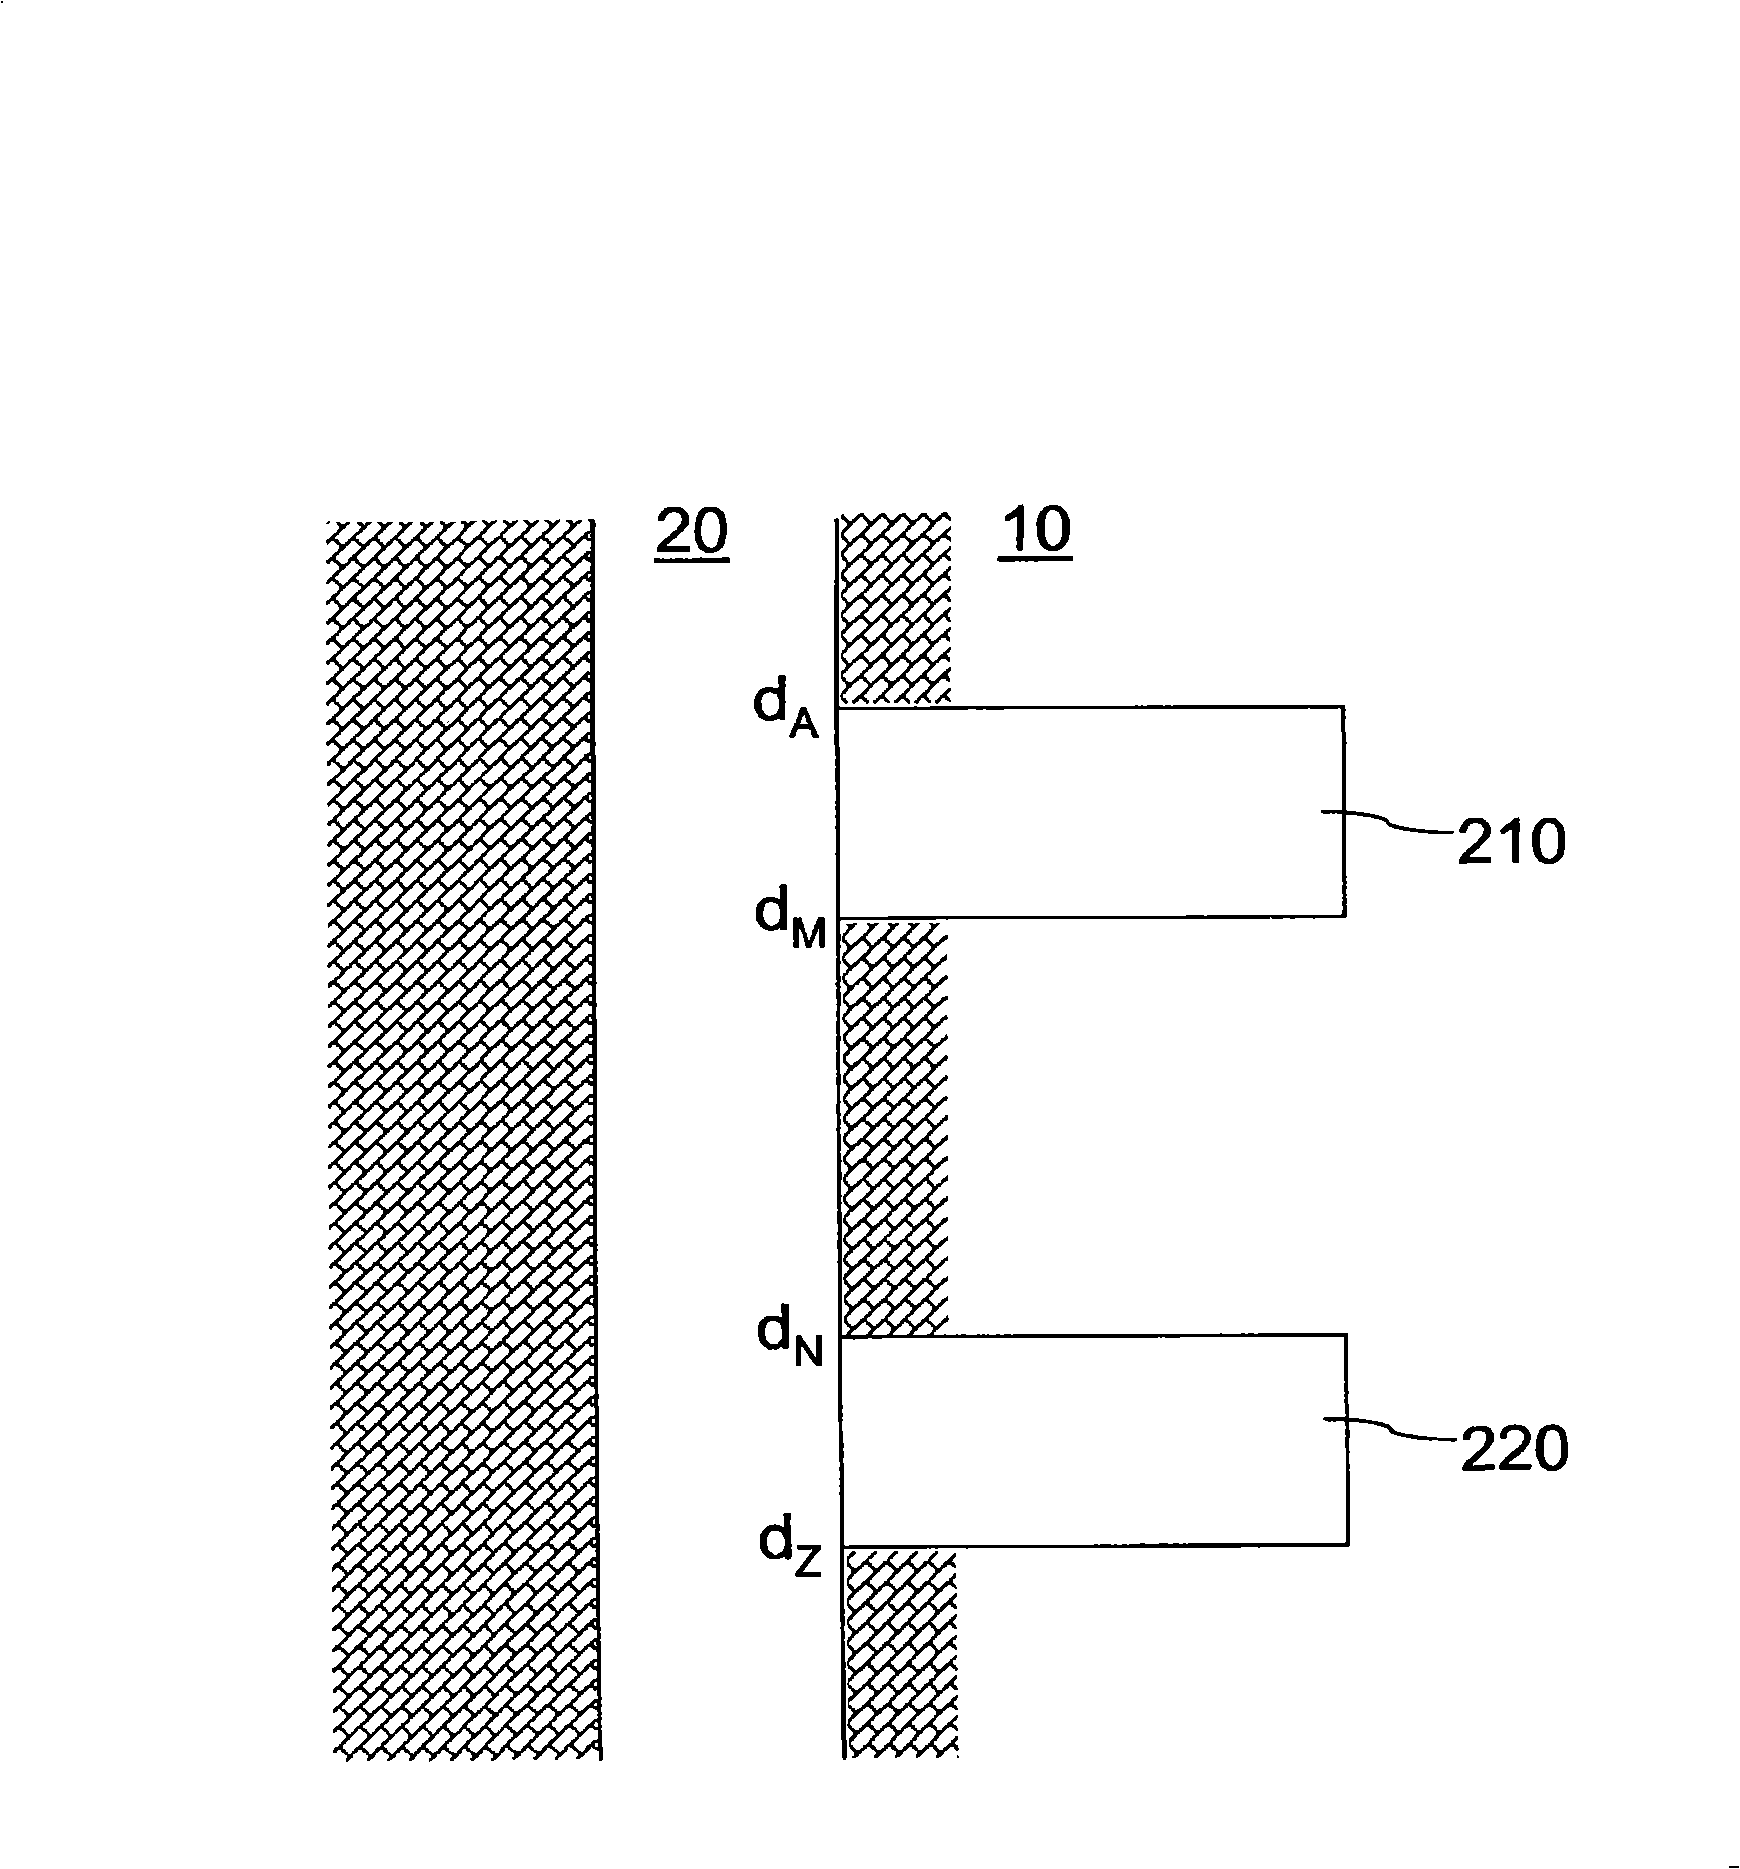 Devices, systems and methods for assessing porous media properties